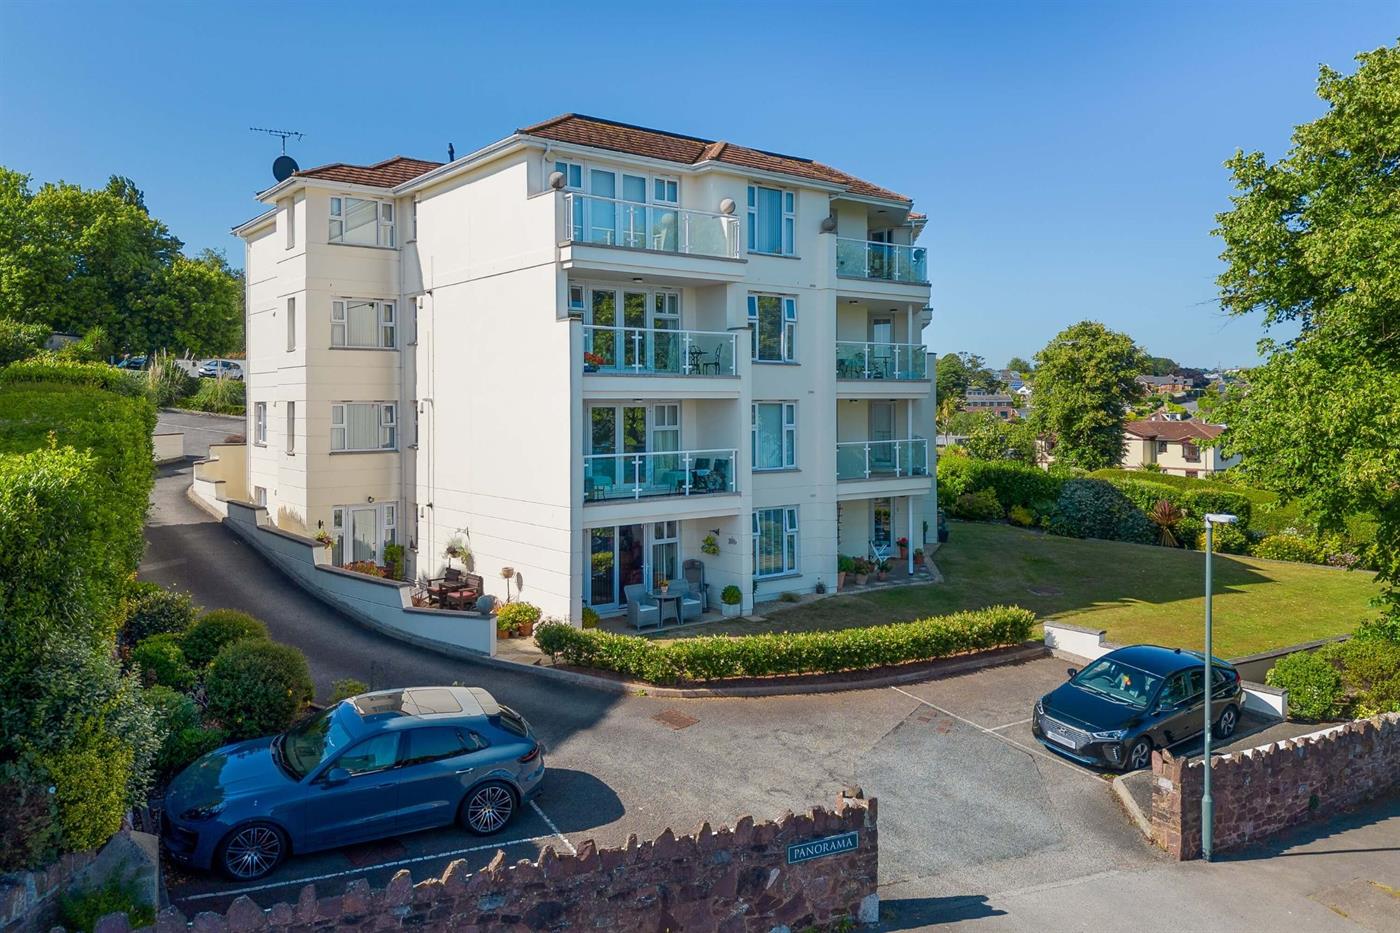 2 Bedroom Apartment for Sale: Panorama, Livermead Hill, Torquay, TQ2 6PZ